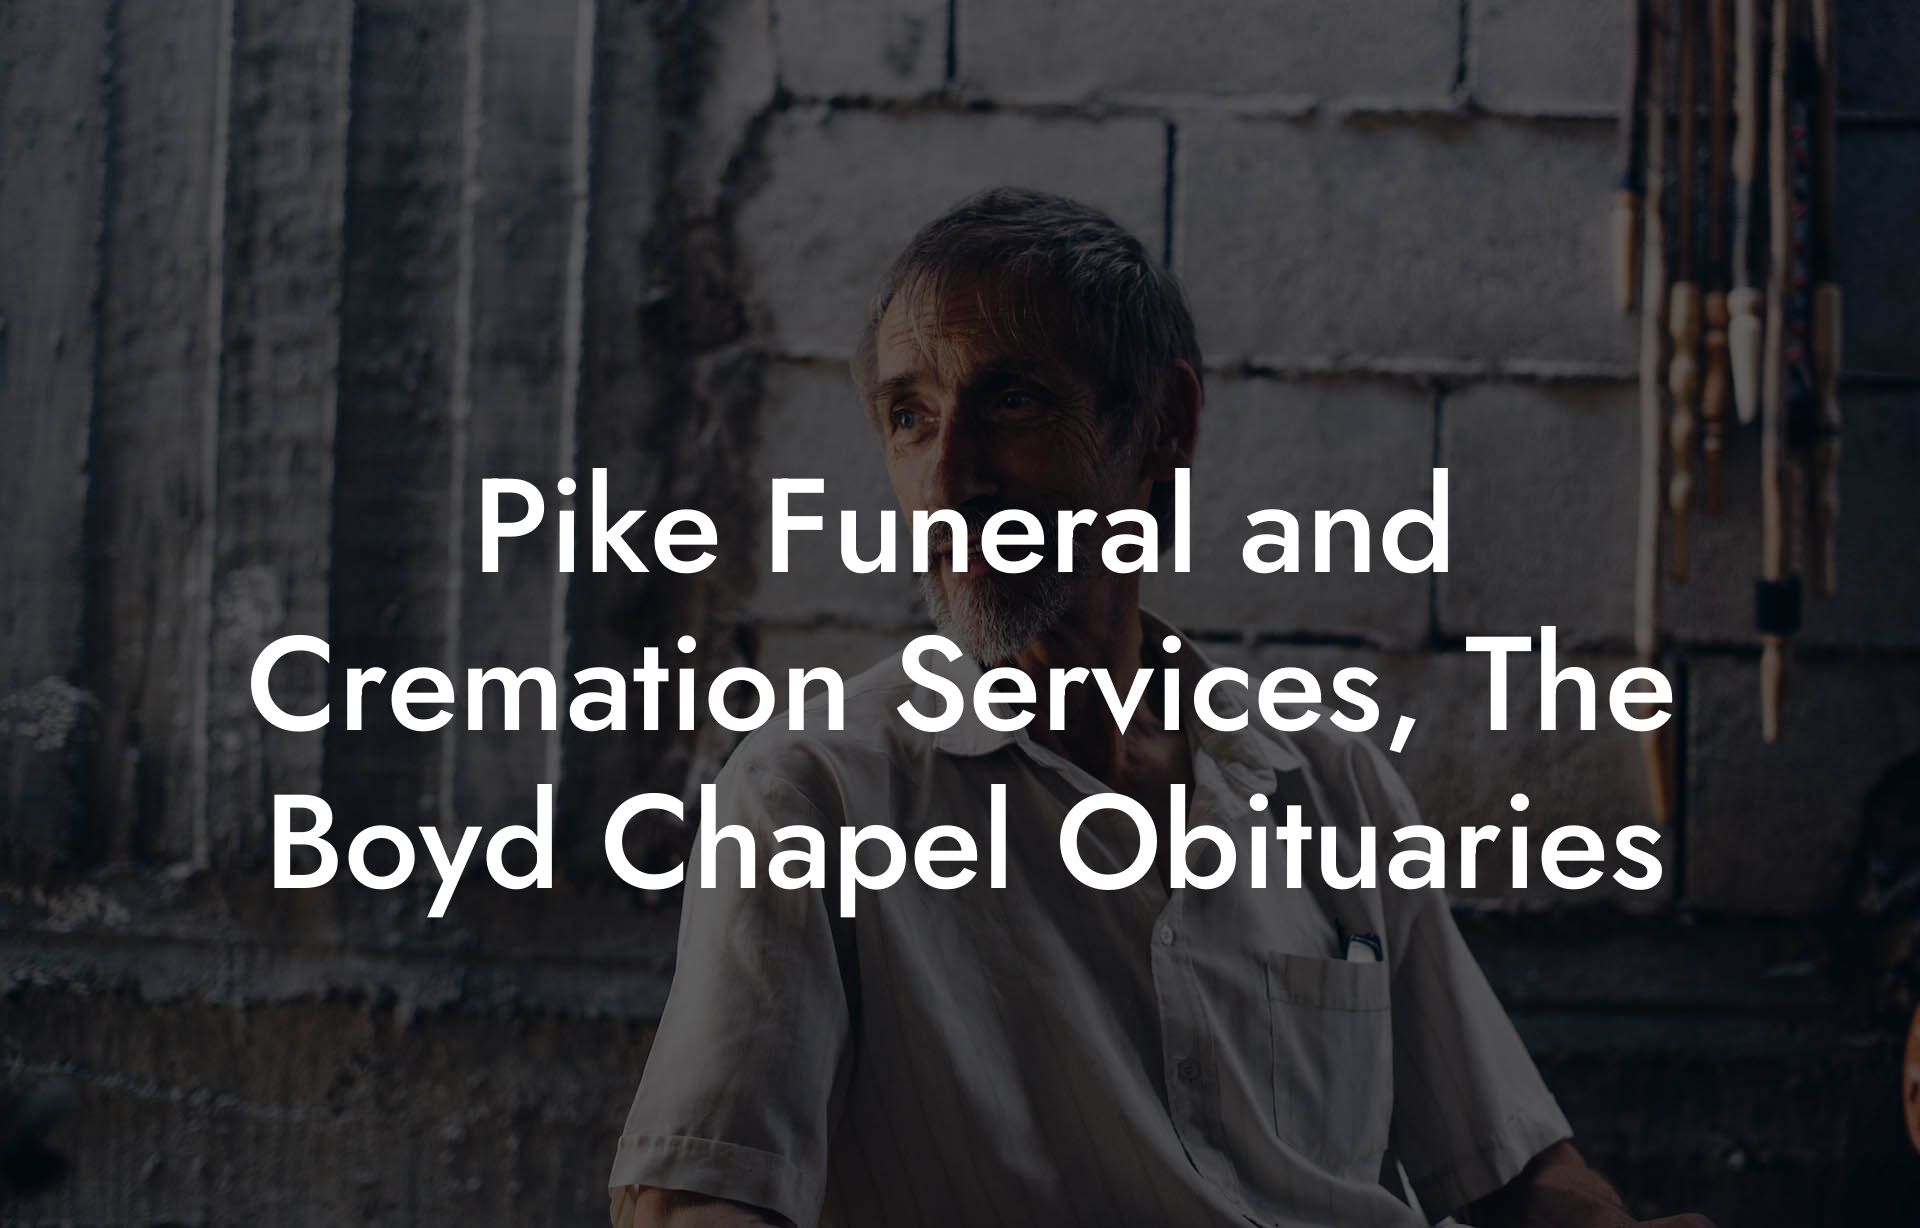 Pike Funeral and Cremation Services, The Boyd Chapel Obituaries